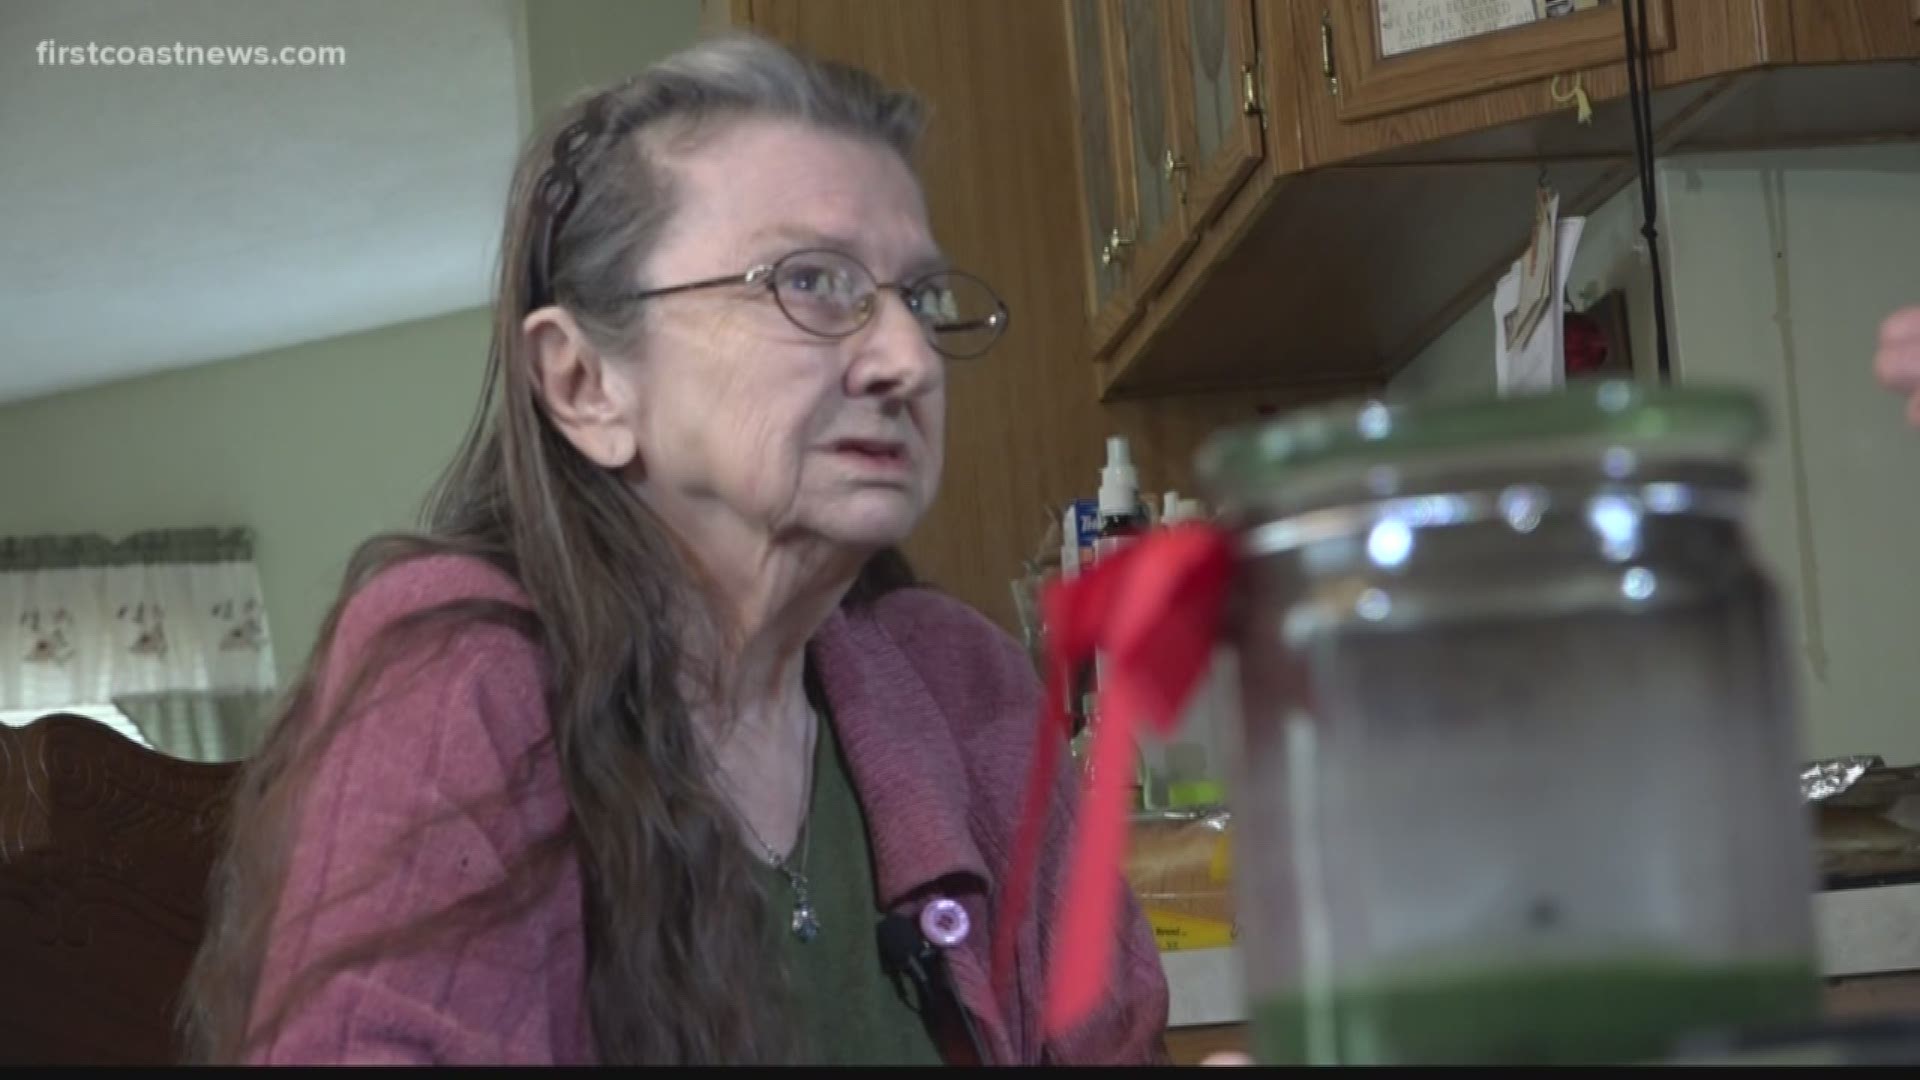 Sandra Michael wasn't able to get access to her much-needed medication after she was wrongfully declared dead by Social Security and her health insurance.